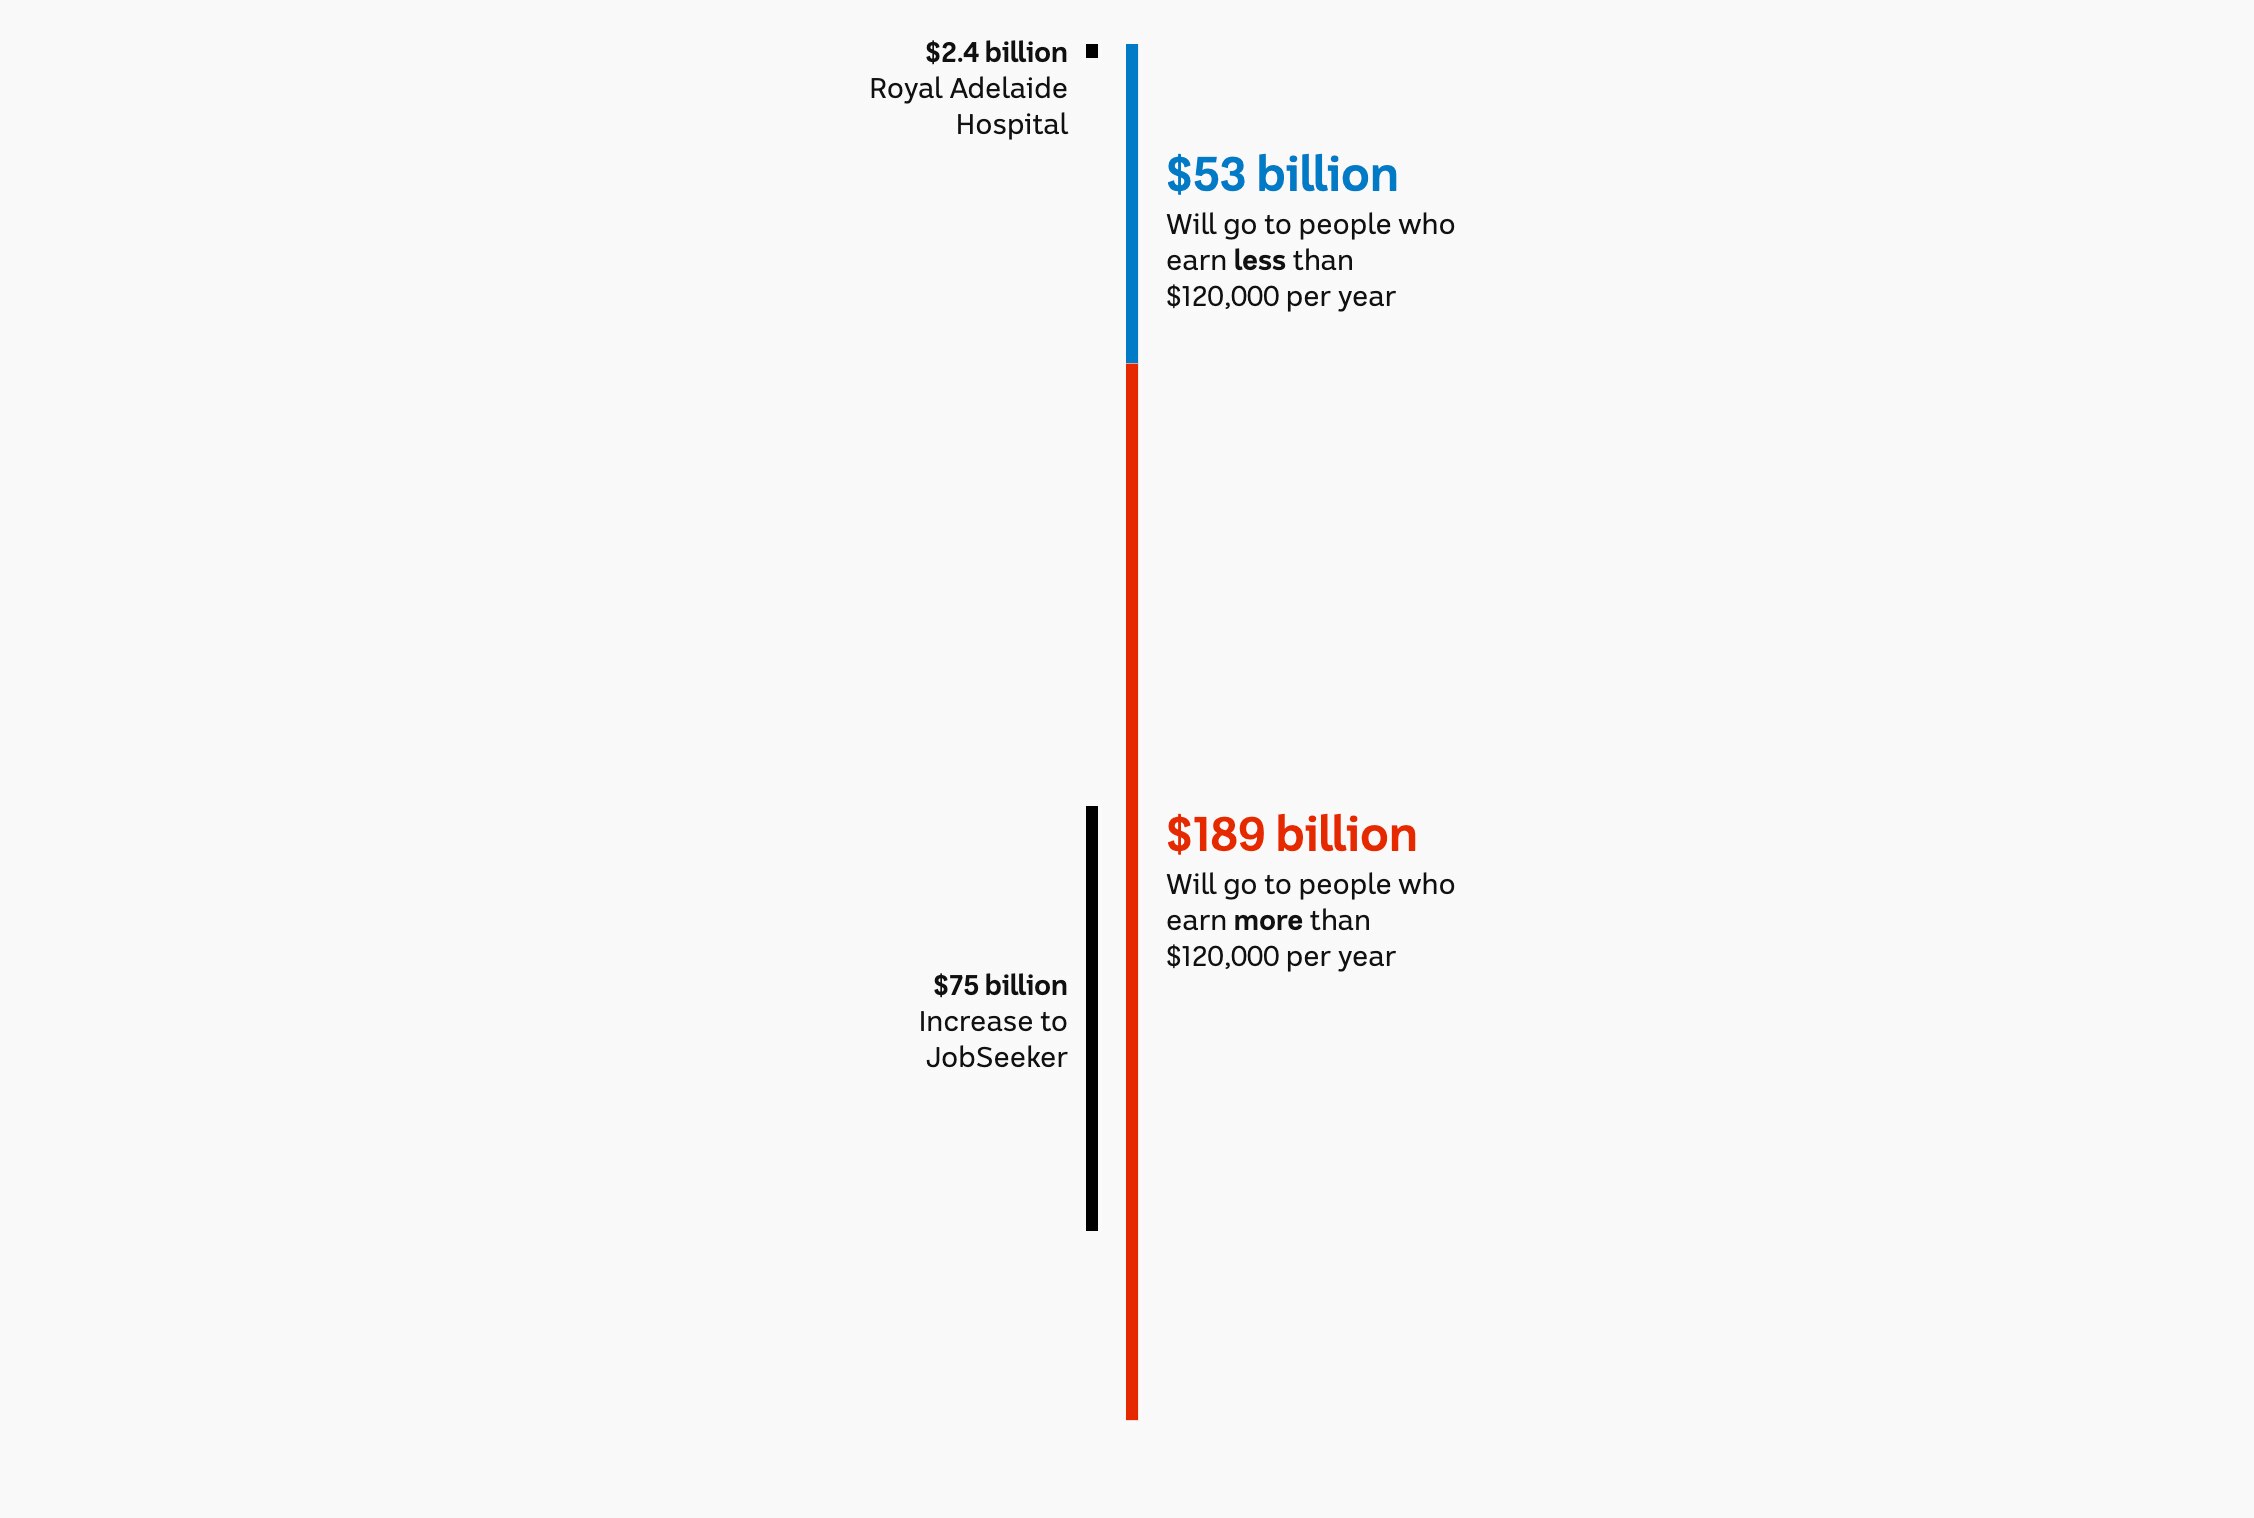 A chart showing the divide between $53 billion and $189 billion going to those making less or more than $120k.